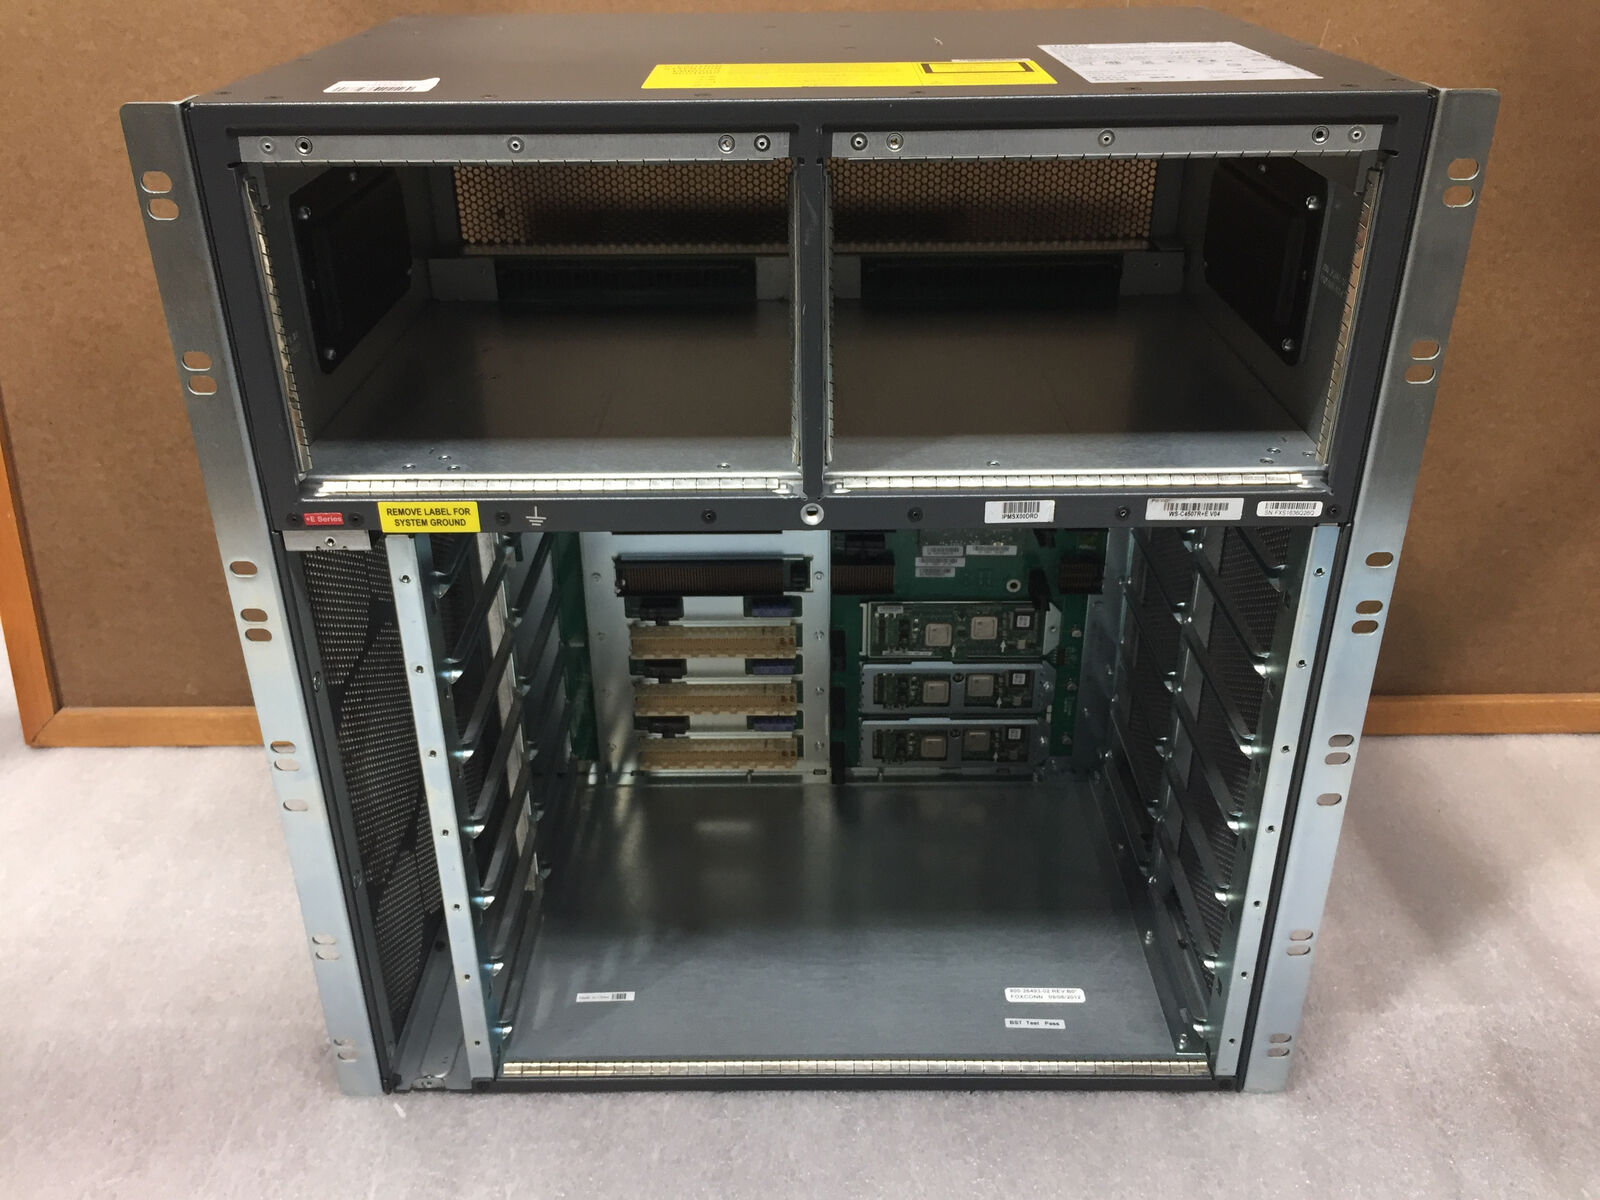 Cisco Catalyst (WS-C4507R+E) 4500-E Series Rack-Mountable Switch Chassis ONLY